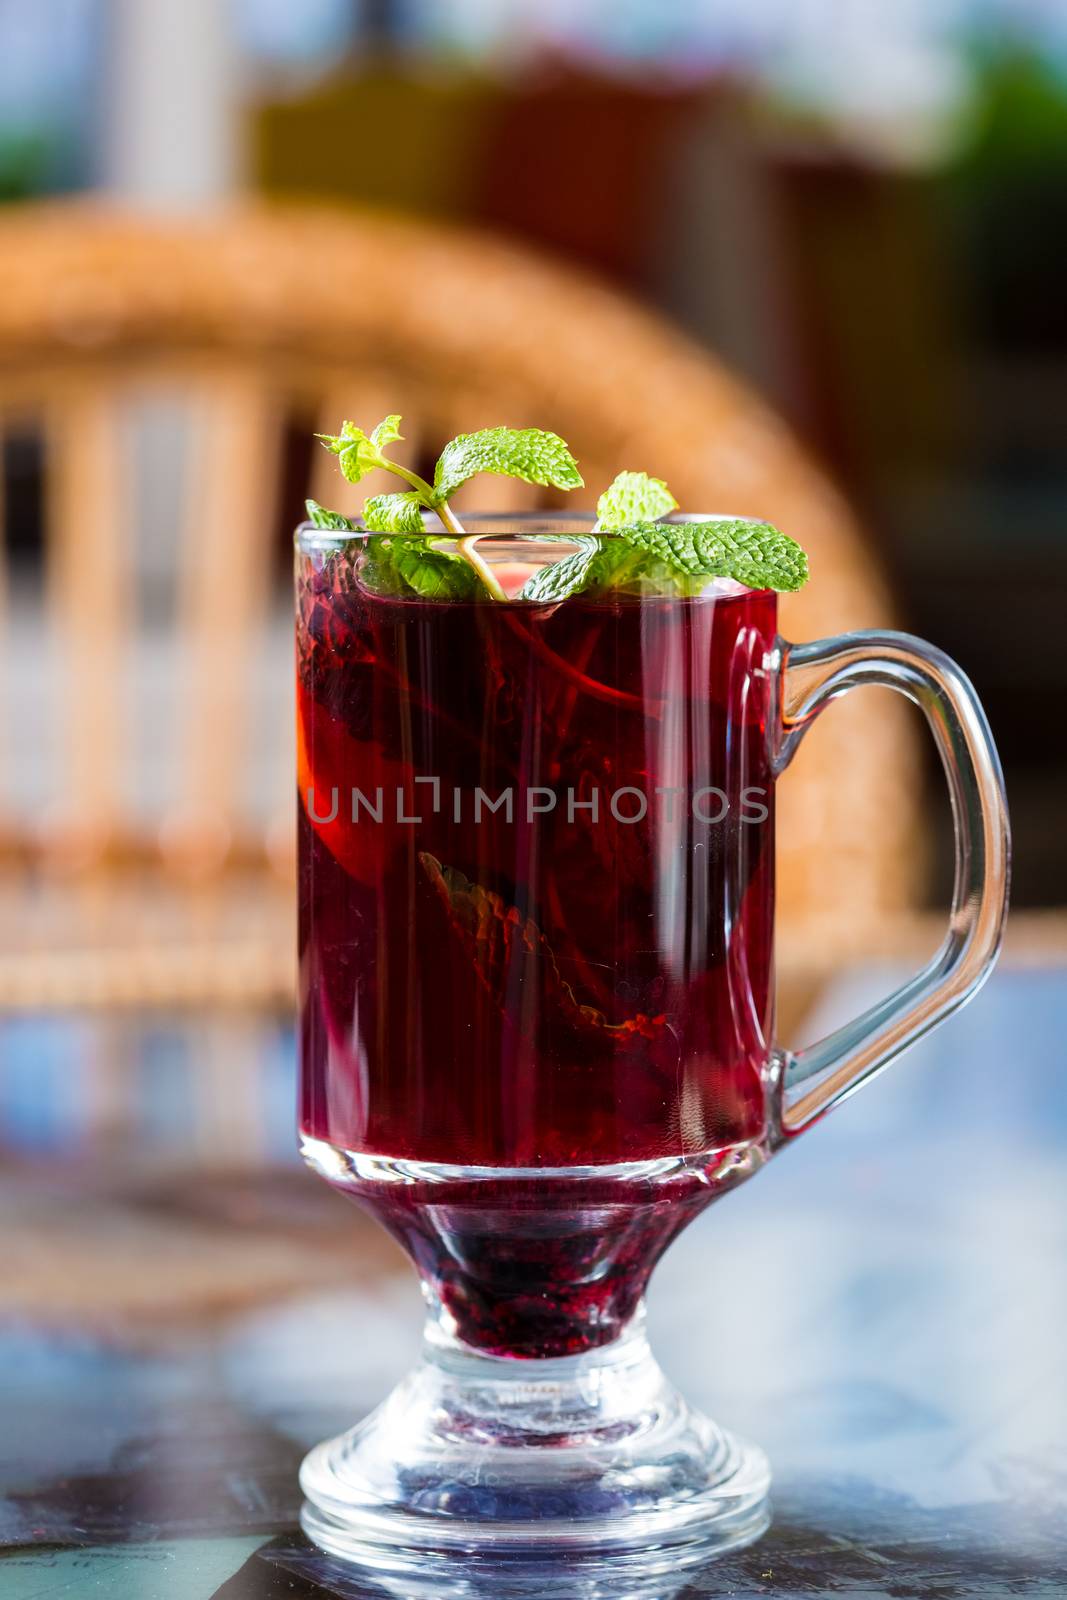 Blackberry tea in a glass cup. Decorated with mint leaves